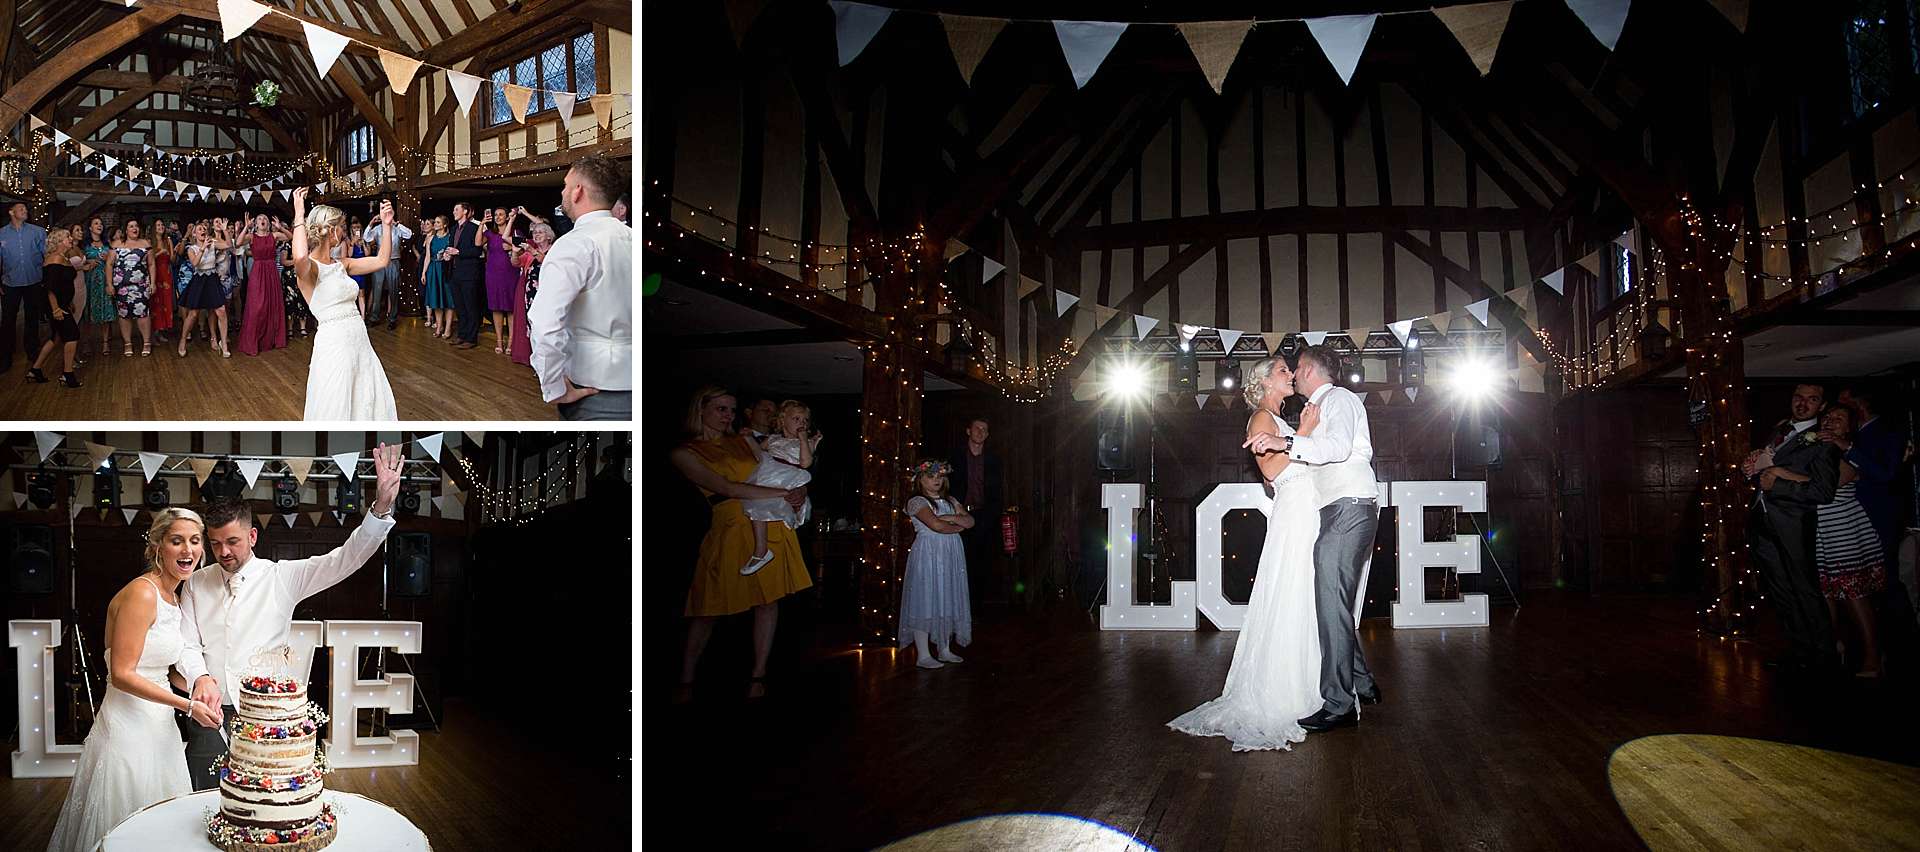 Cake cutting and first dance